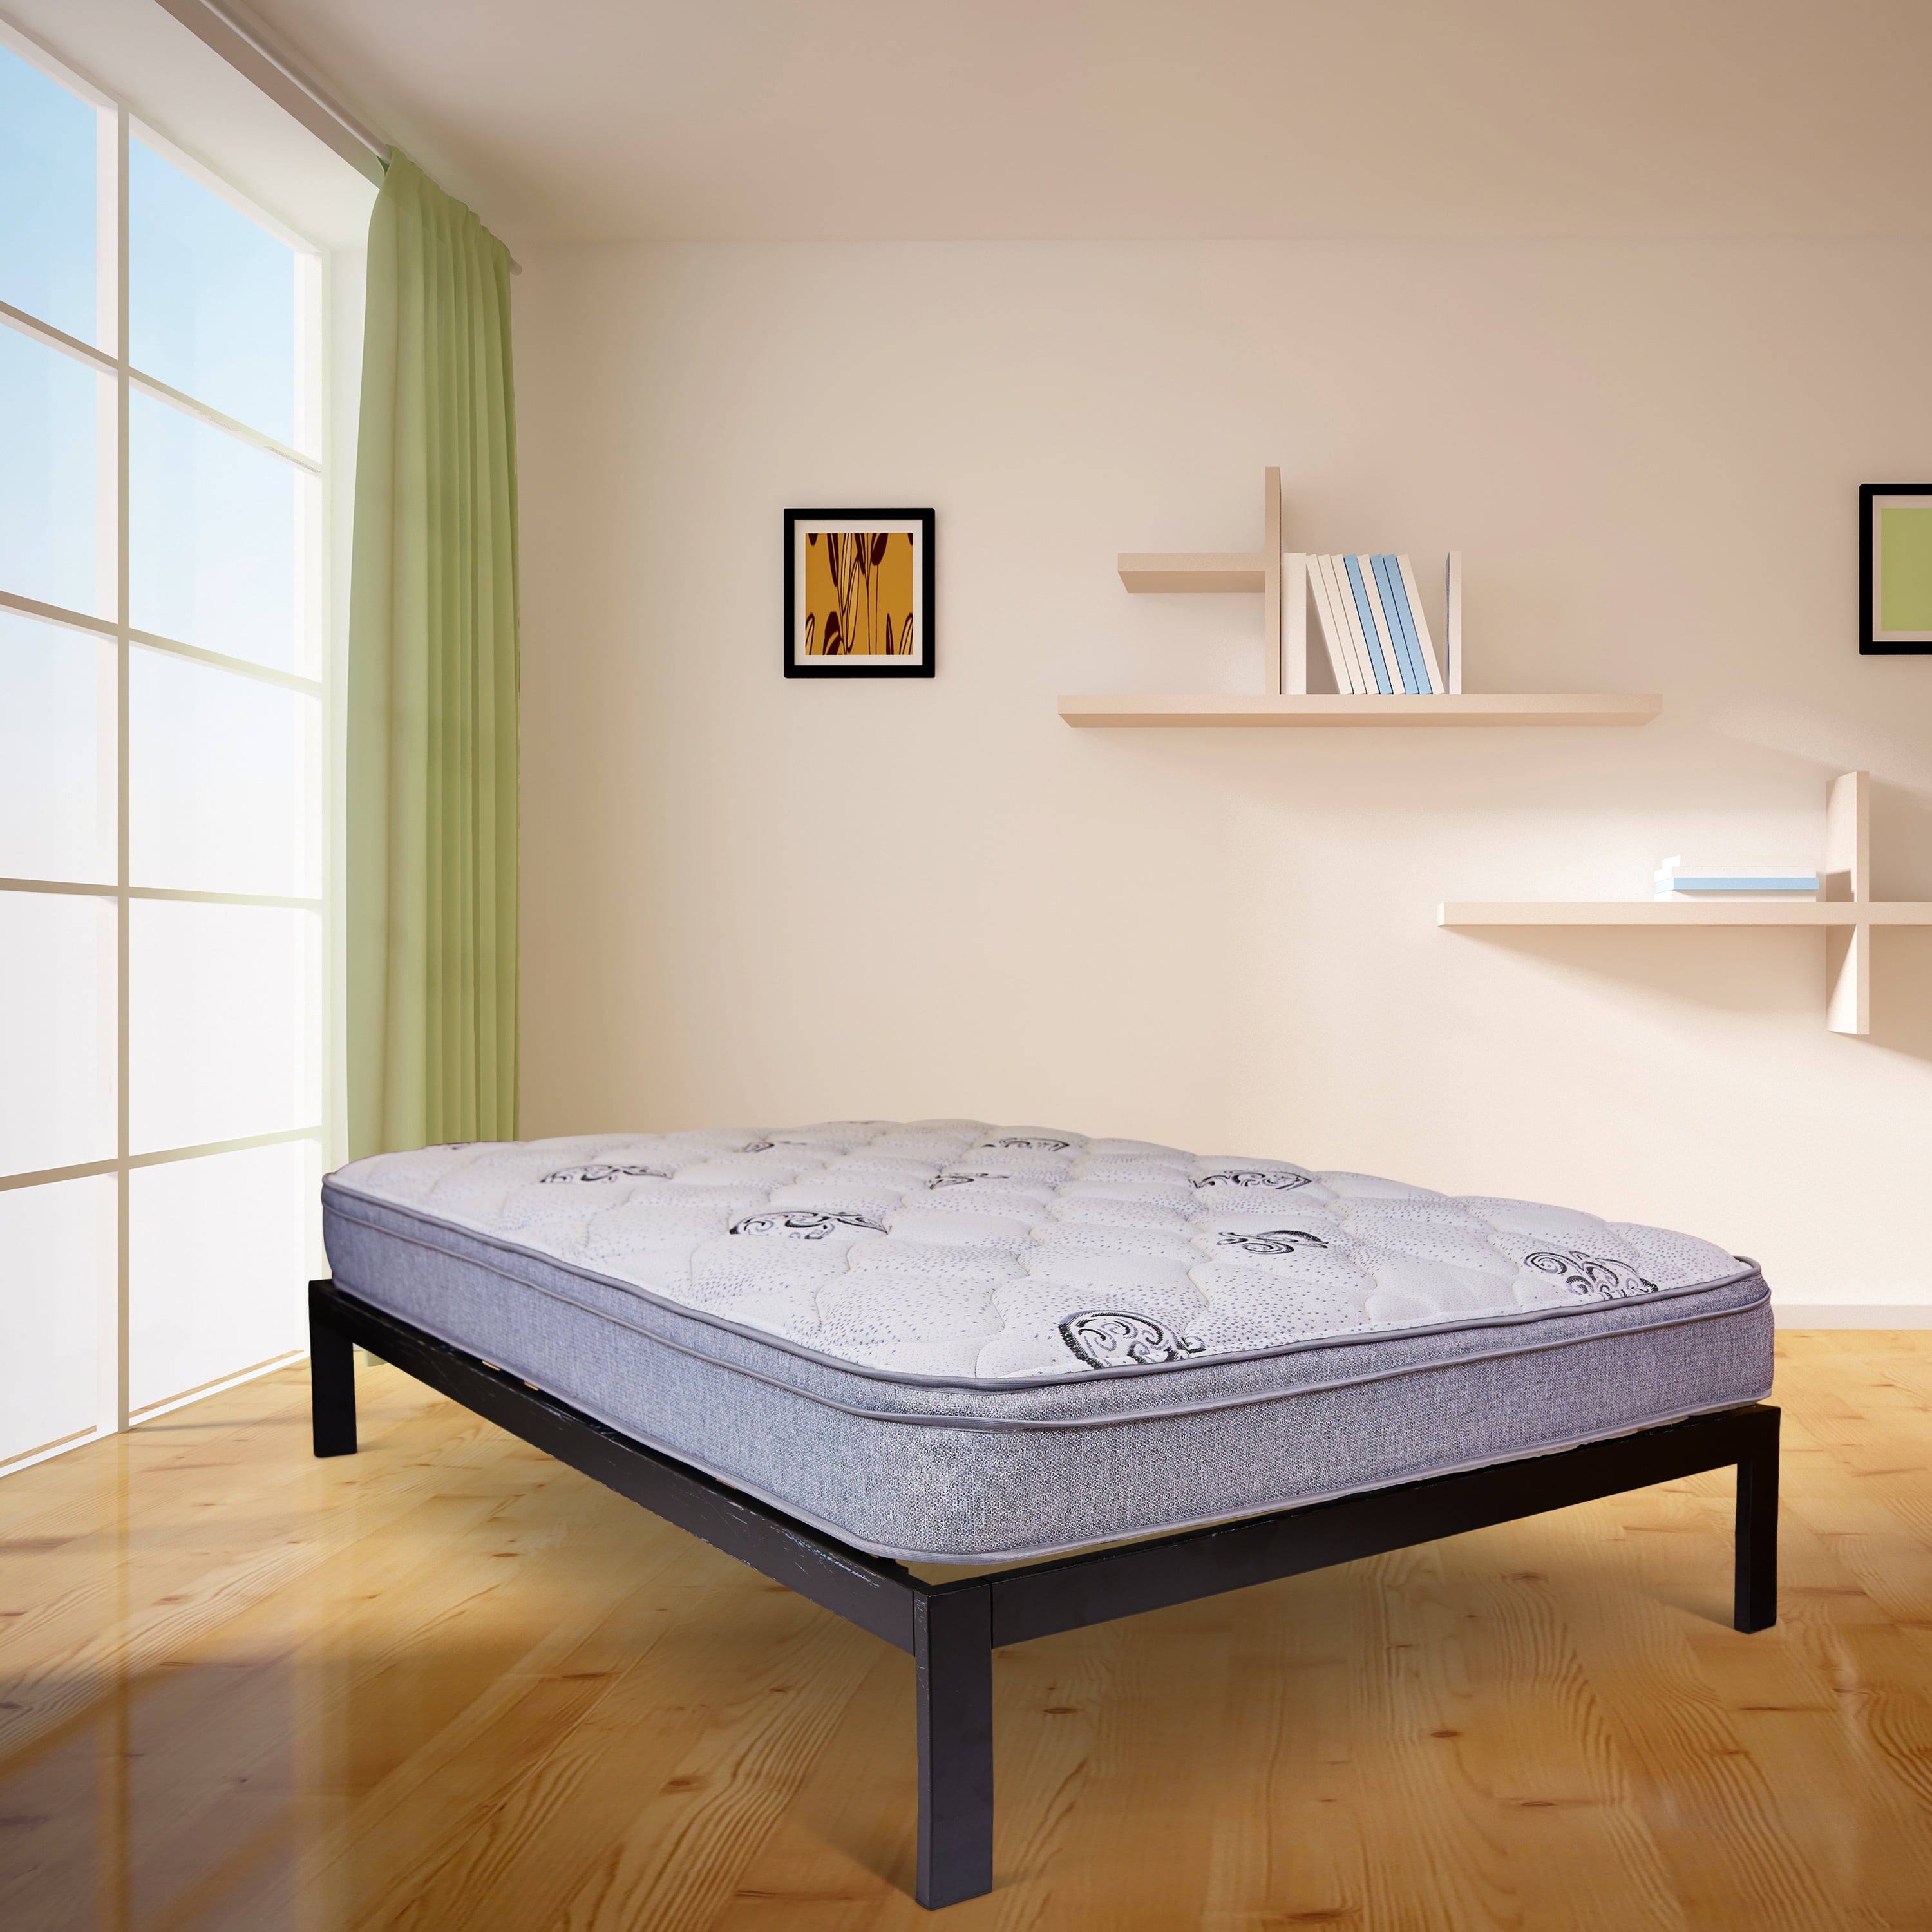 Twin, Details about   Mattress 6 Inch Polyester Filled Bunk Bed Mattress with Jacquard Cover 